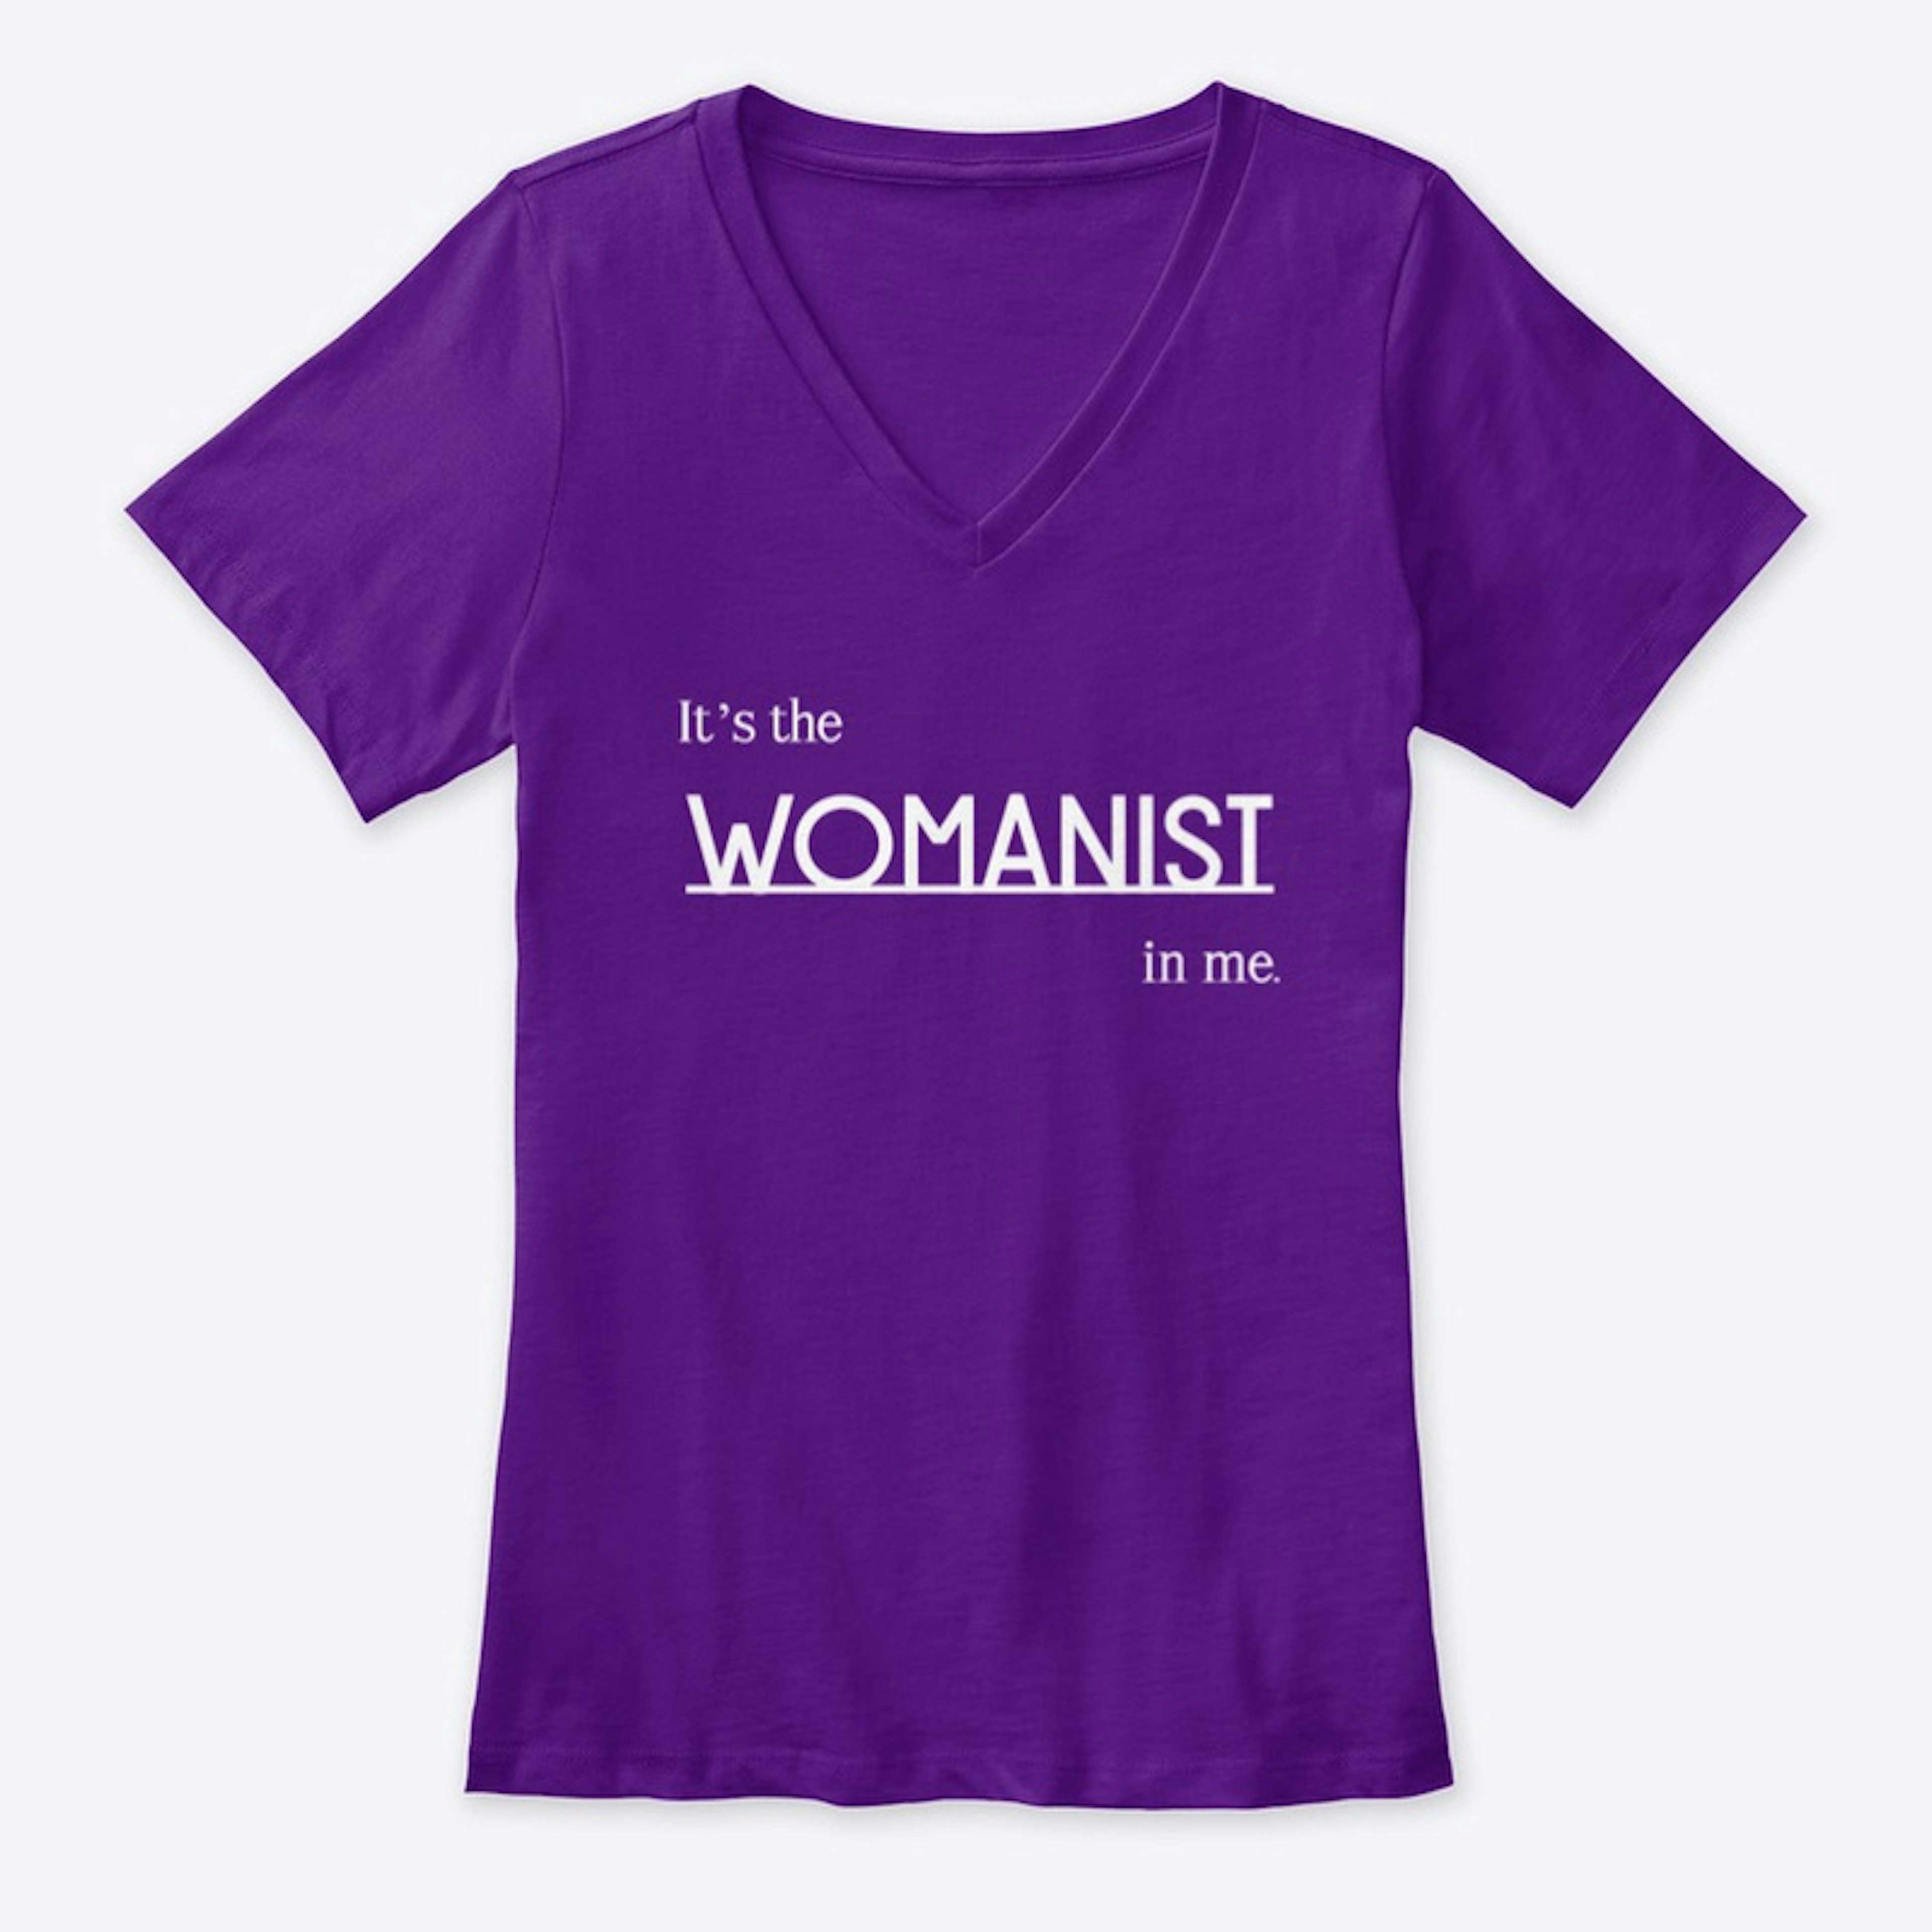 Womanist in Me